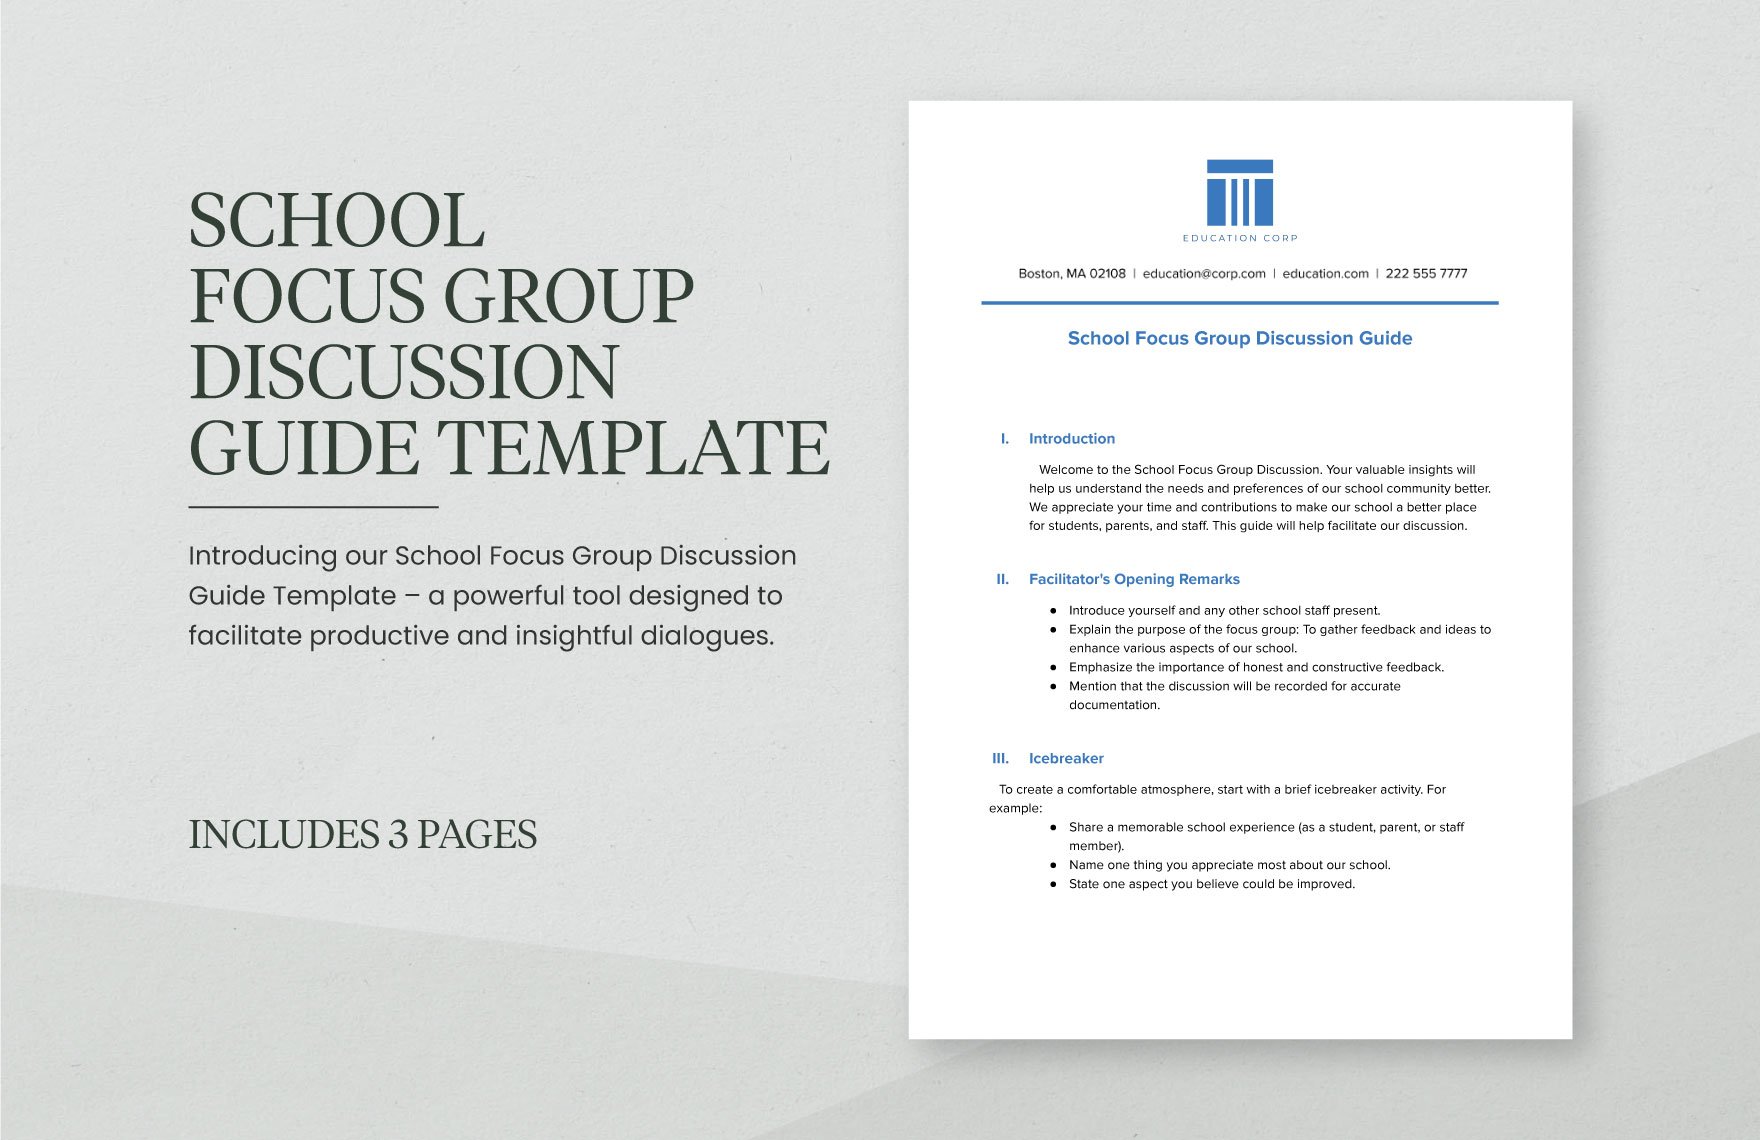 School Focus Group Discussion Guide Template